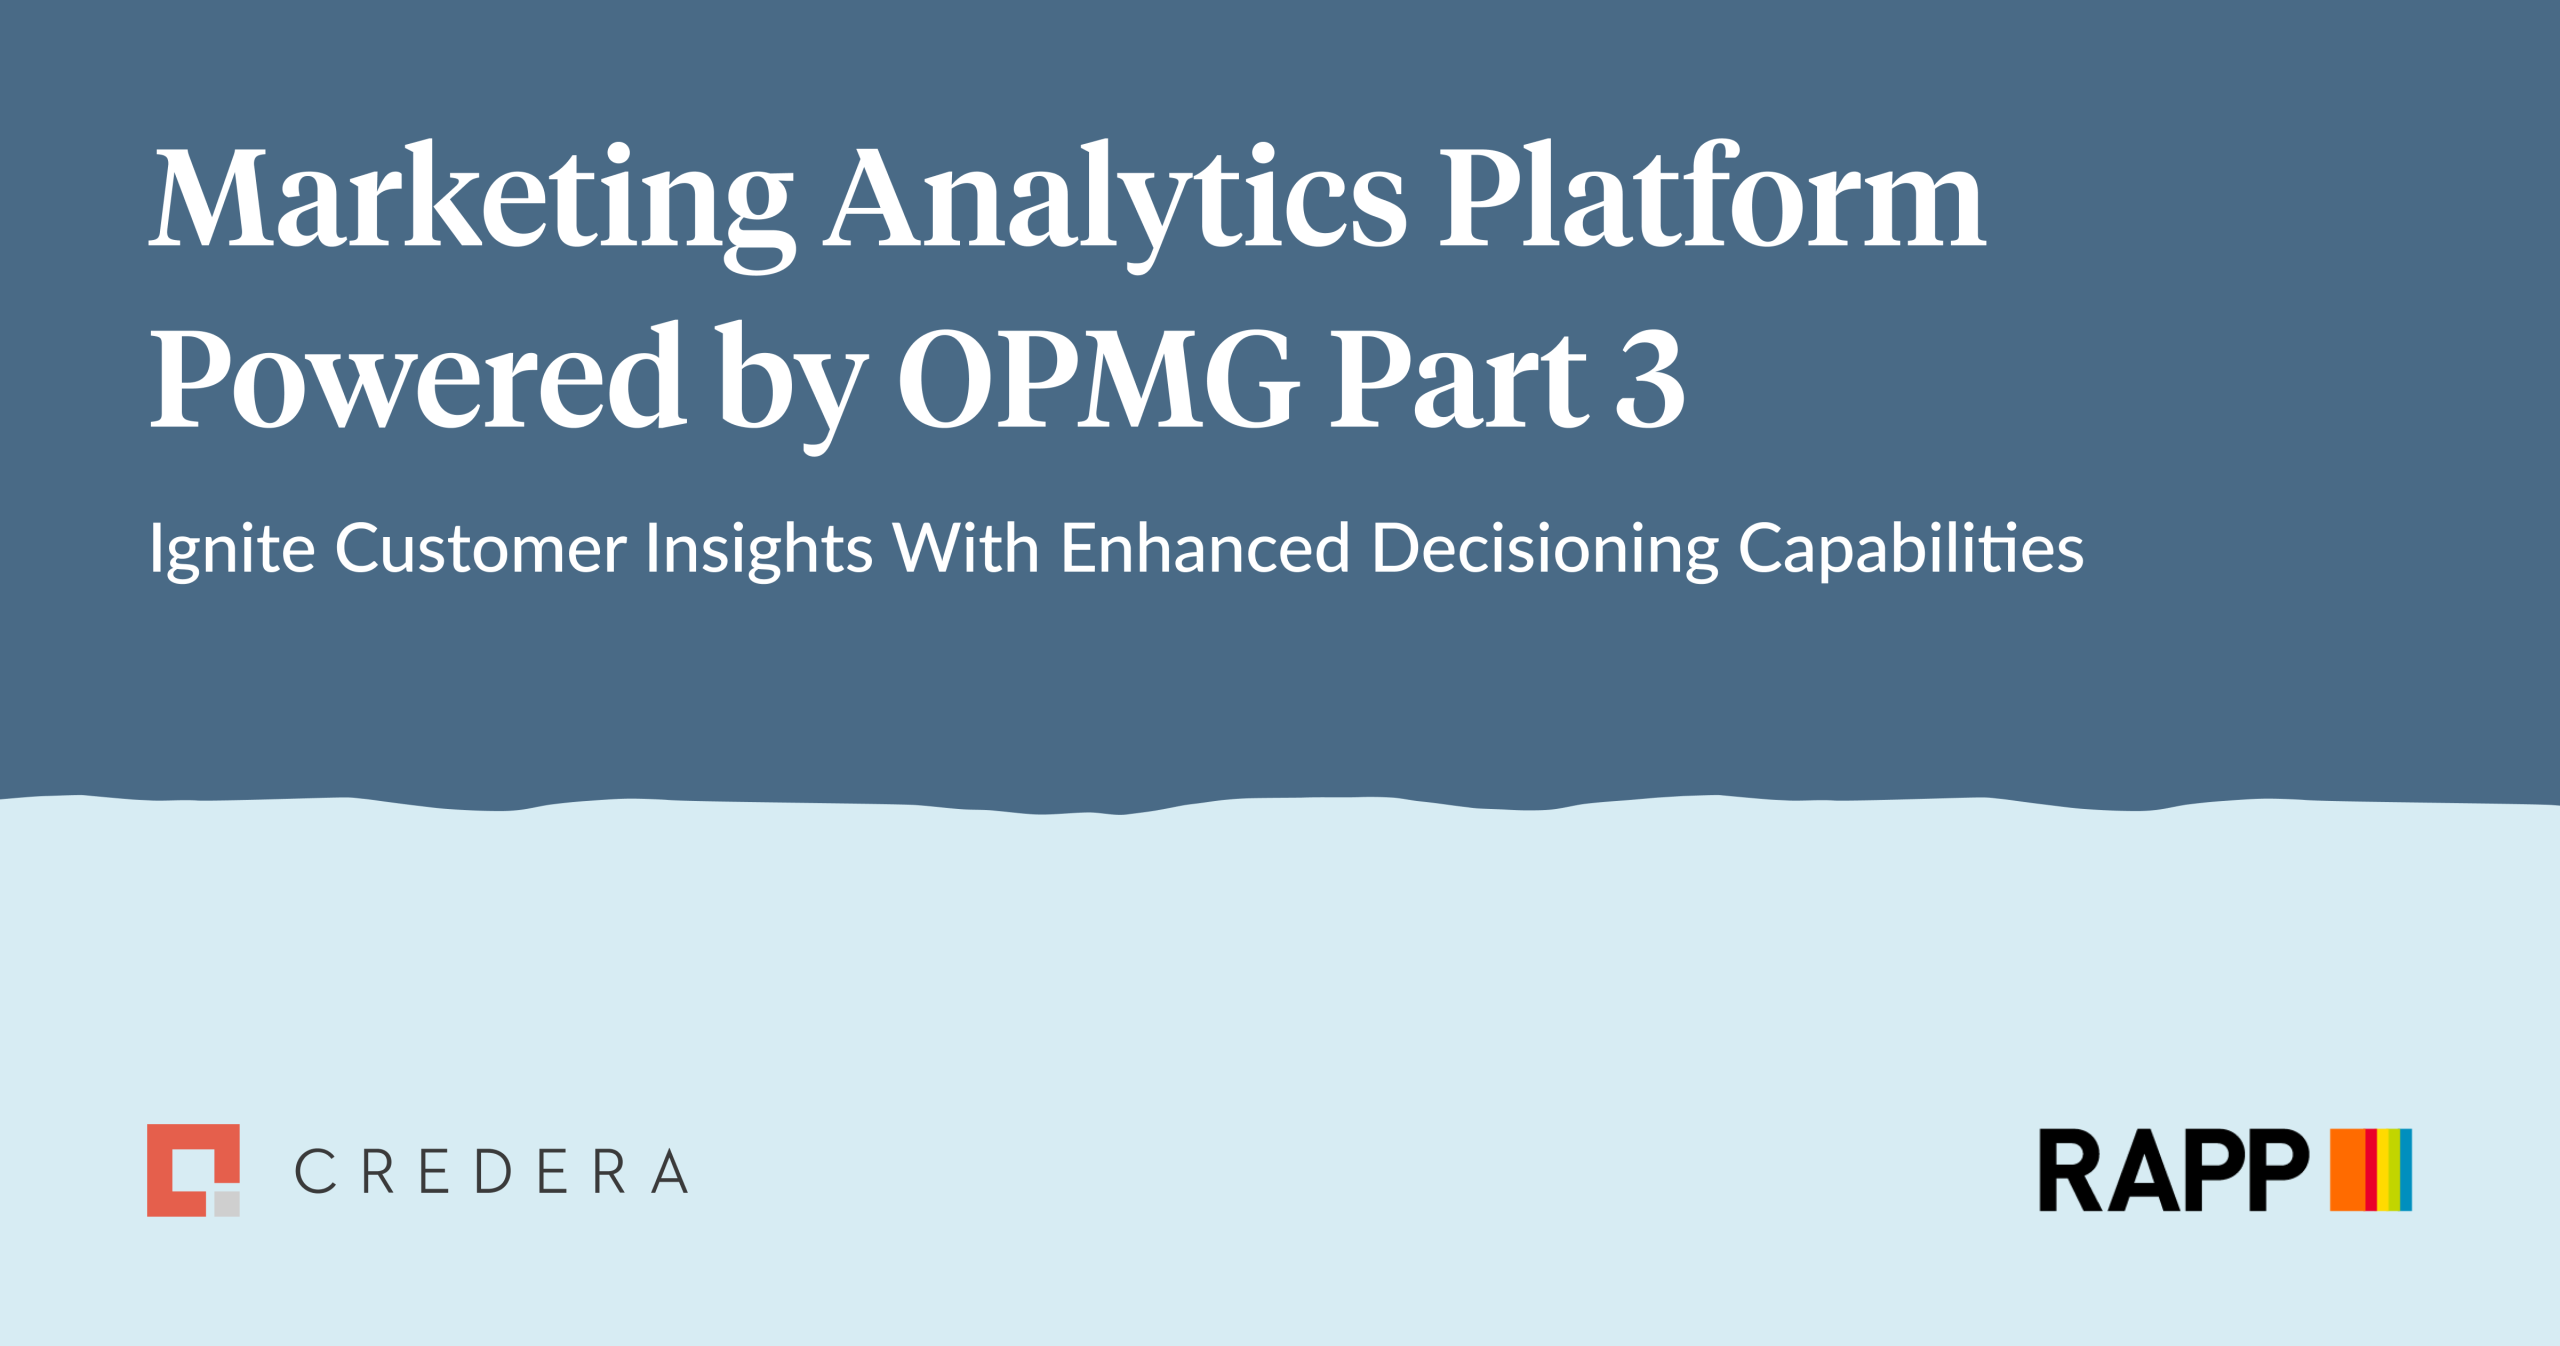 Marketing Analytics Platform Powered by OPMG Part 3: Ignite Customer Insights With Enhanced Decisioning Capabilities